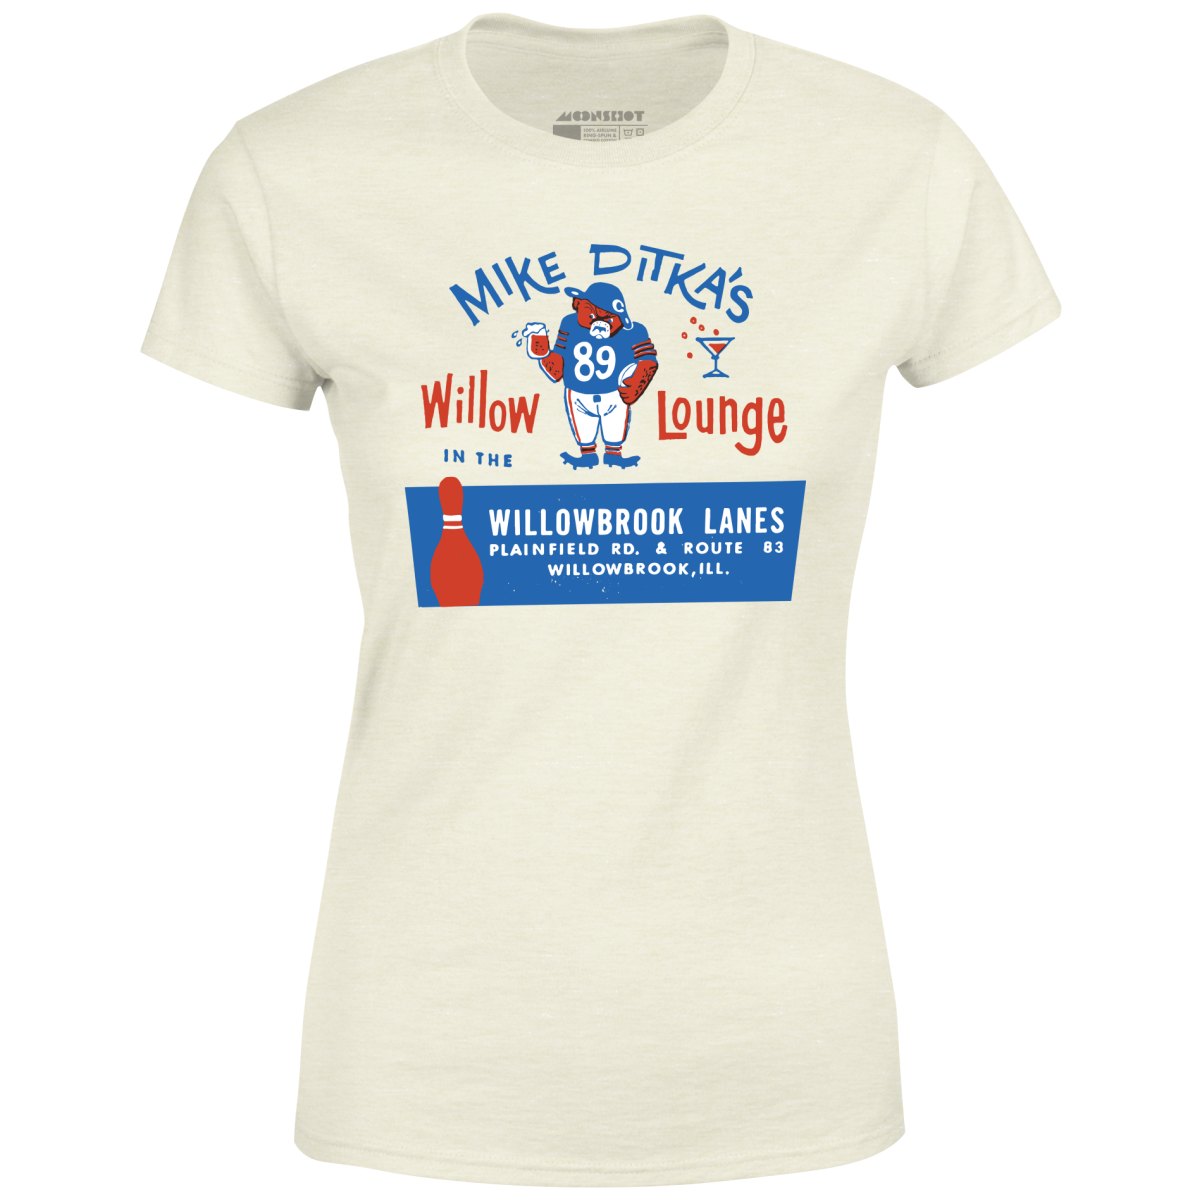 Mike Ditka's Willow Lounge - Willowbrook, IL - Vintage Bowling Alley - Women's T-Shirt